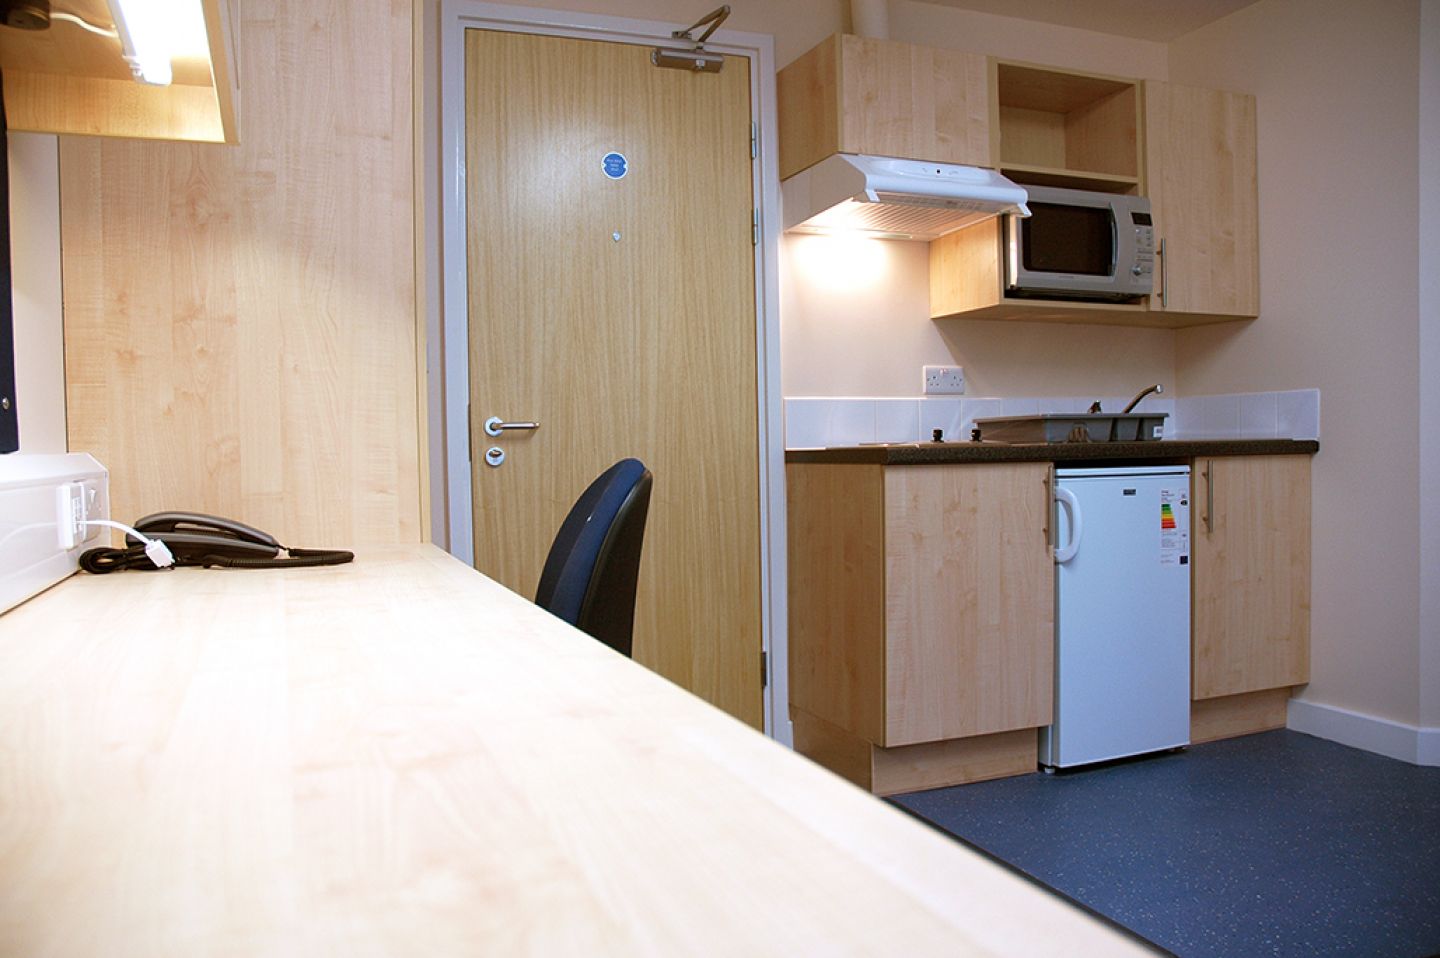 View of a studio room showing the desk, entrance door and kitchen area. The door is a fire door with a closer. The kitchen area has dark blue laminate flooring.